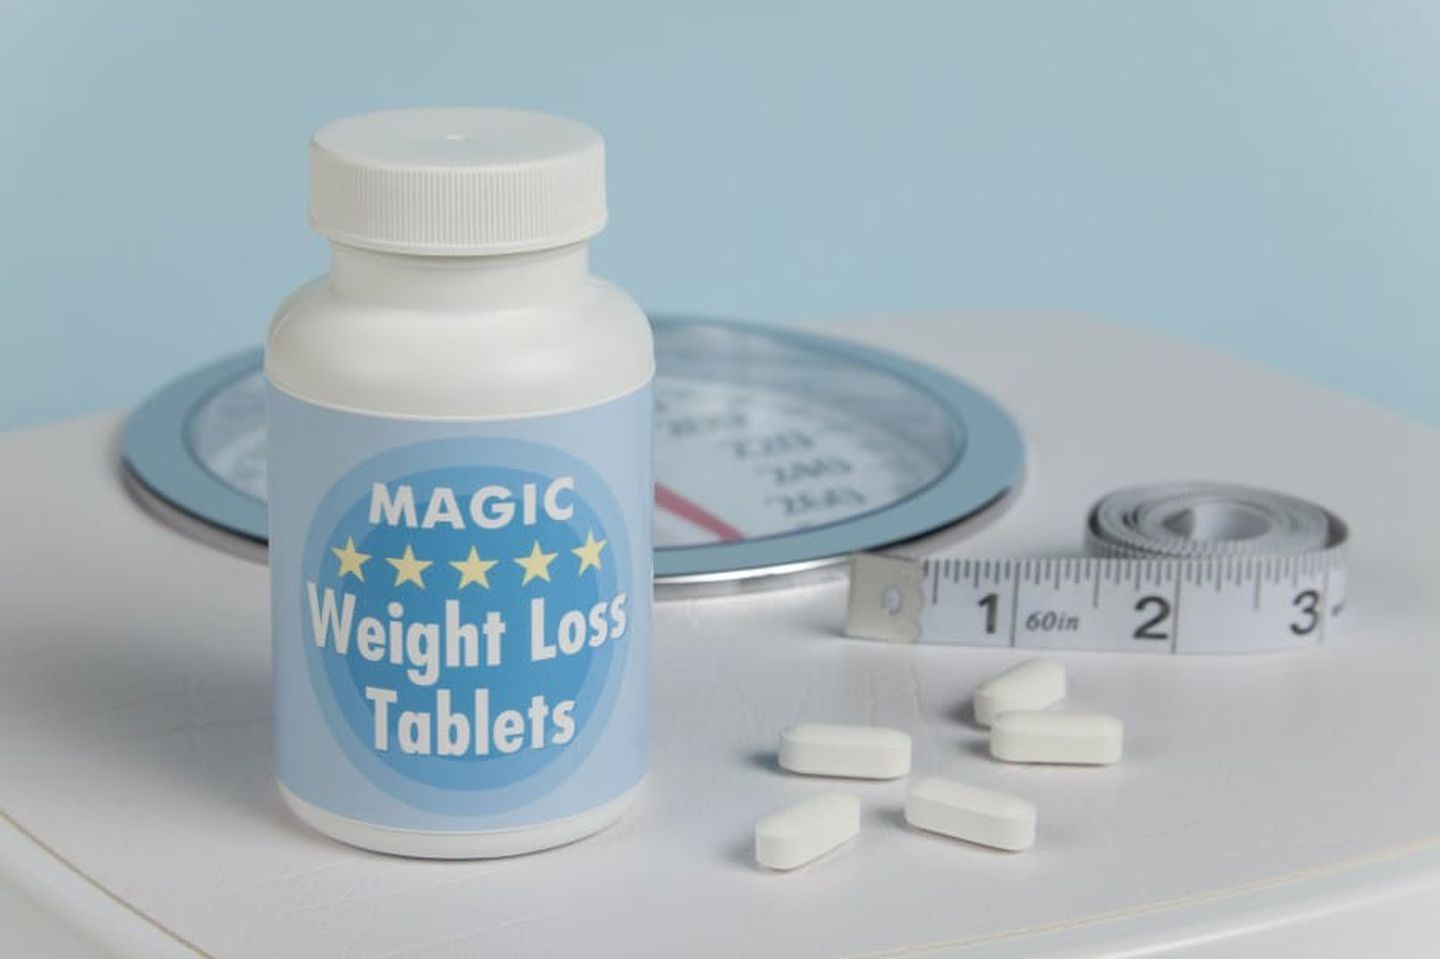 Learn About The Necessity And Risks Involved When Taking Prescribed Diet Drugs